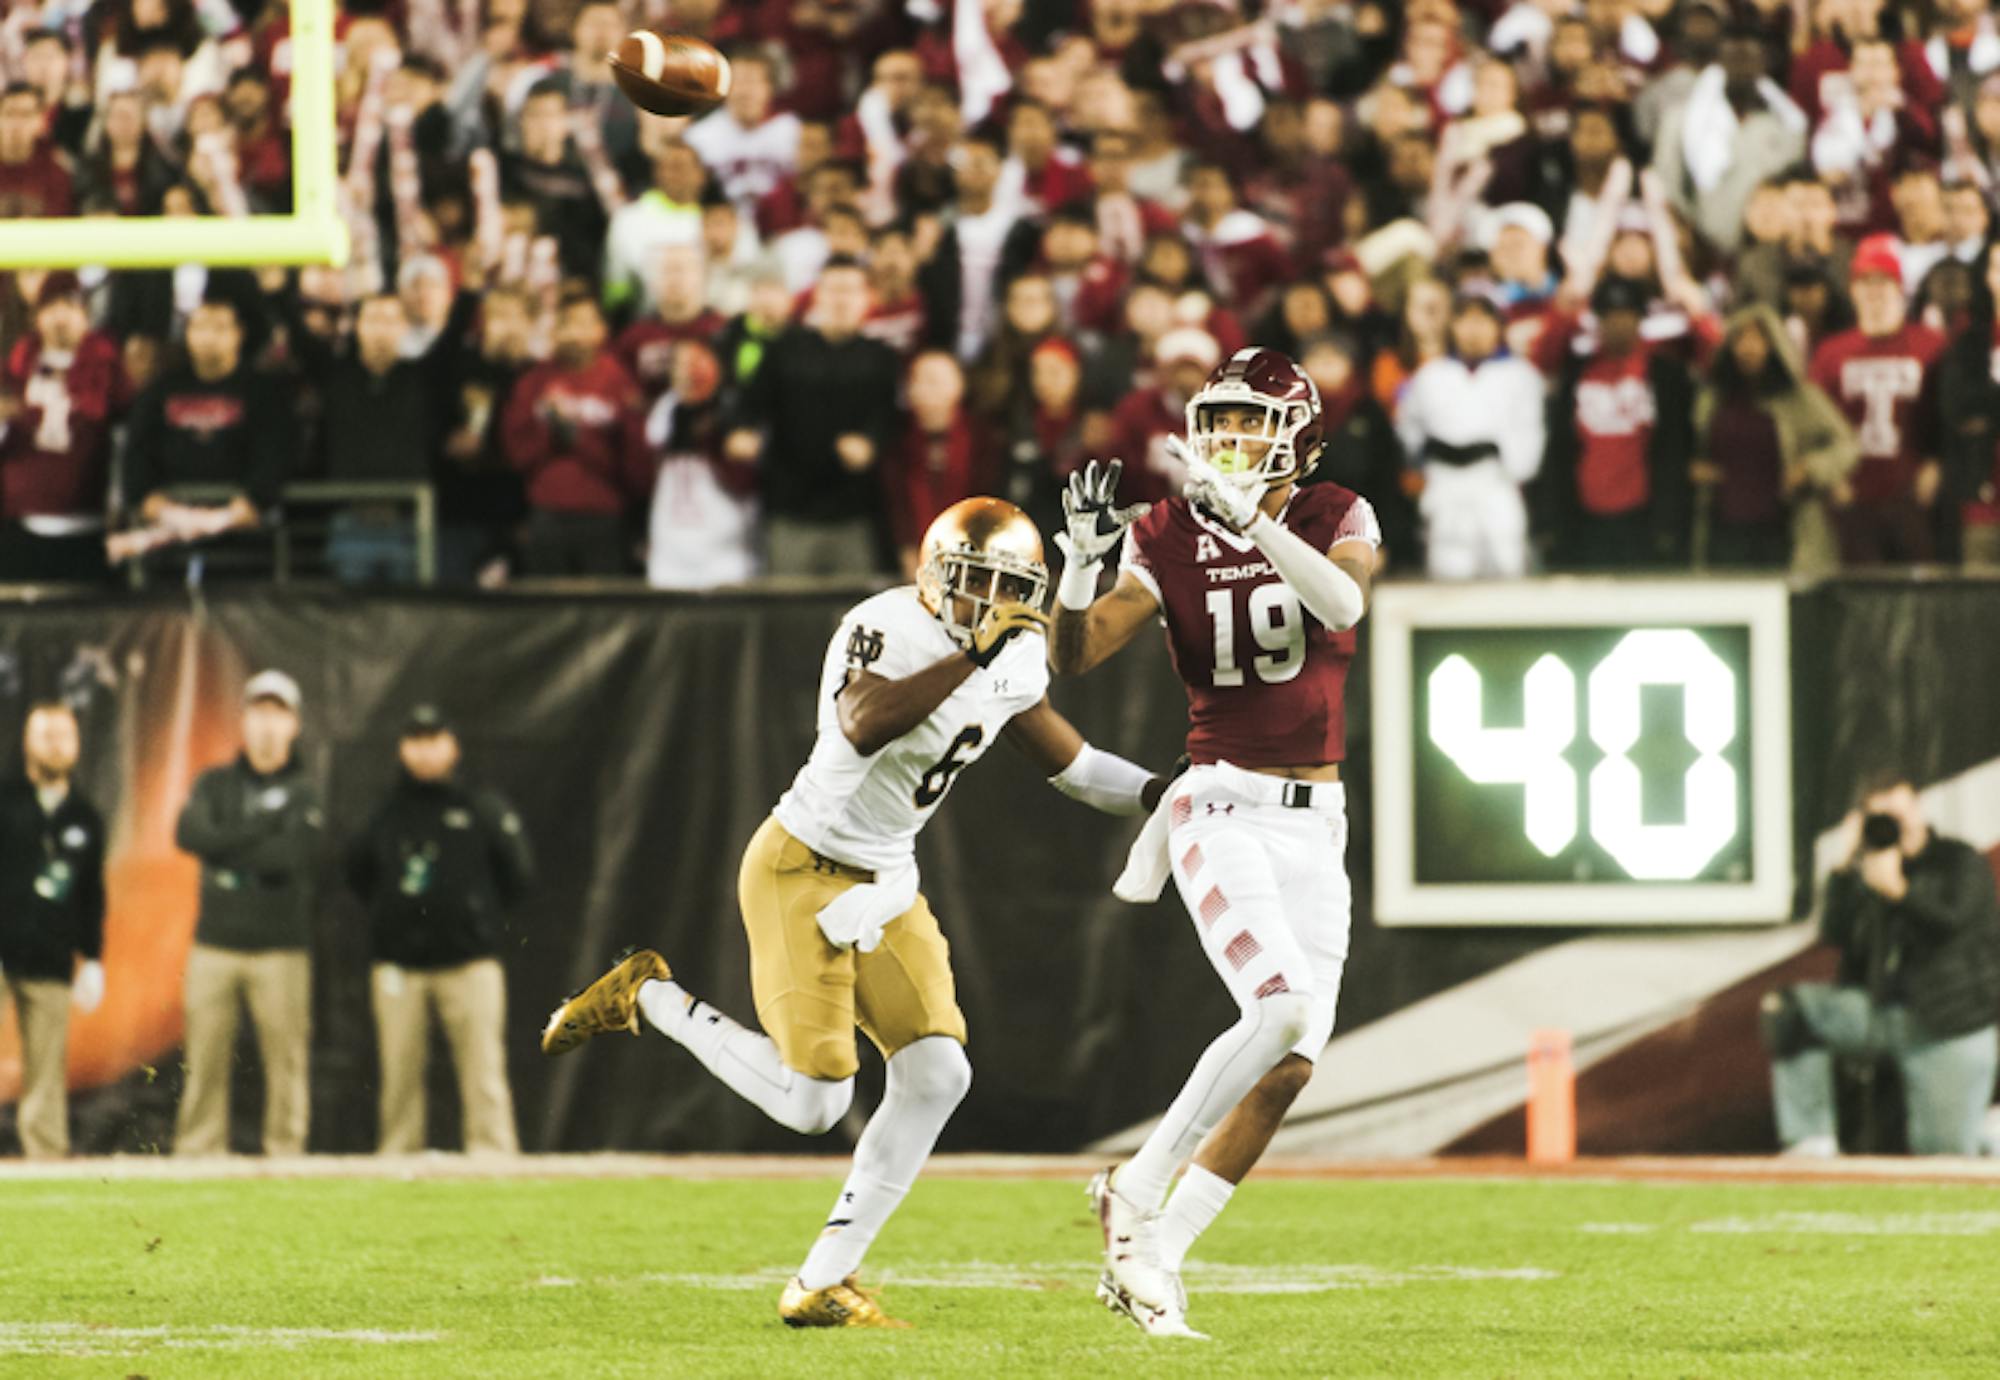 Irish senior cornerback KeiVarae Russell covers Temple redshirt senior receiver Robby Anderson during Notre Dame’s 24-20 win last Saturday. Russell recorded a game-sealing interception in the fourth quarter.